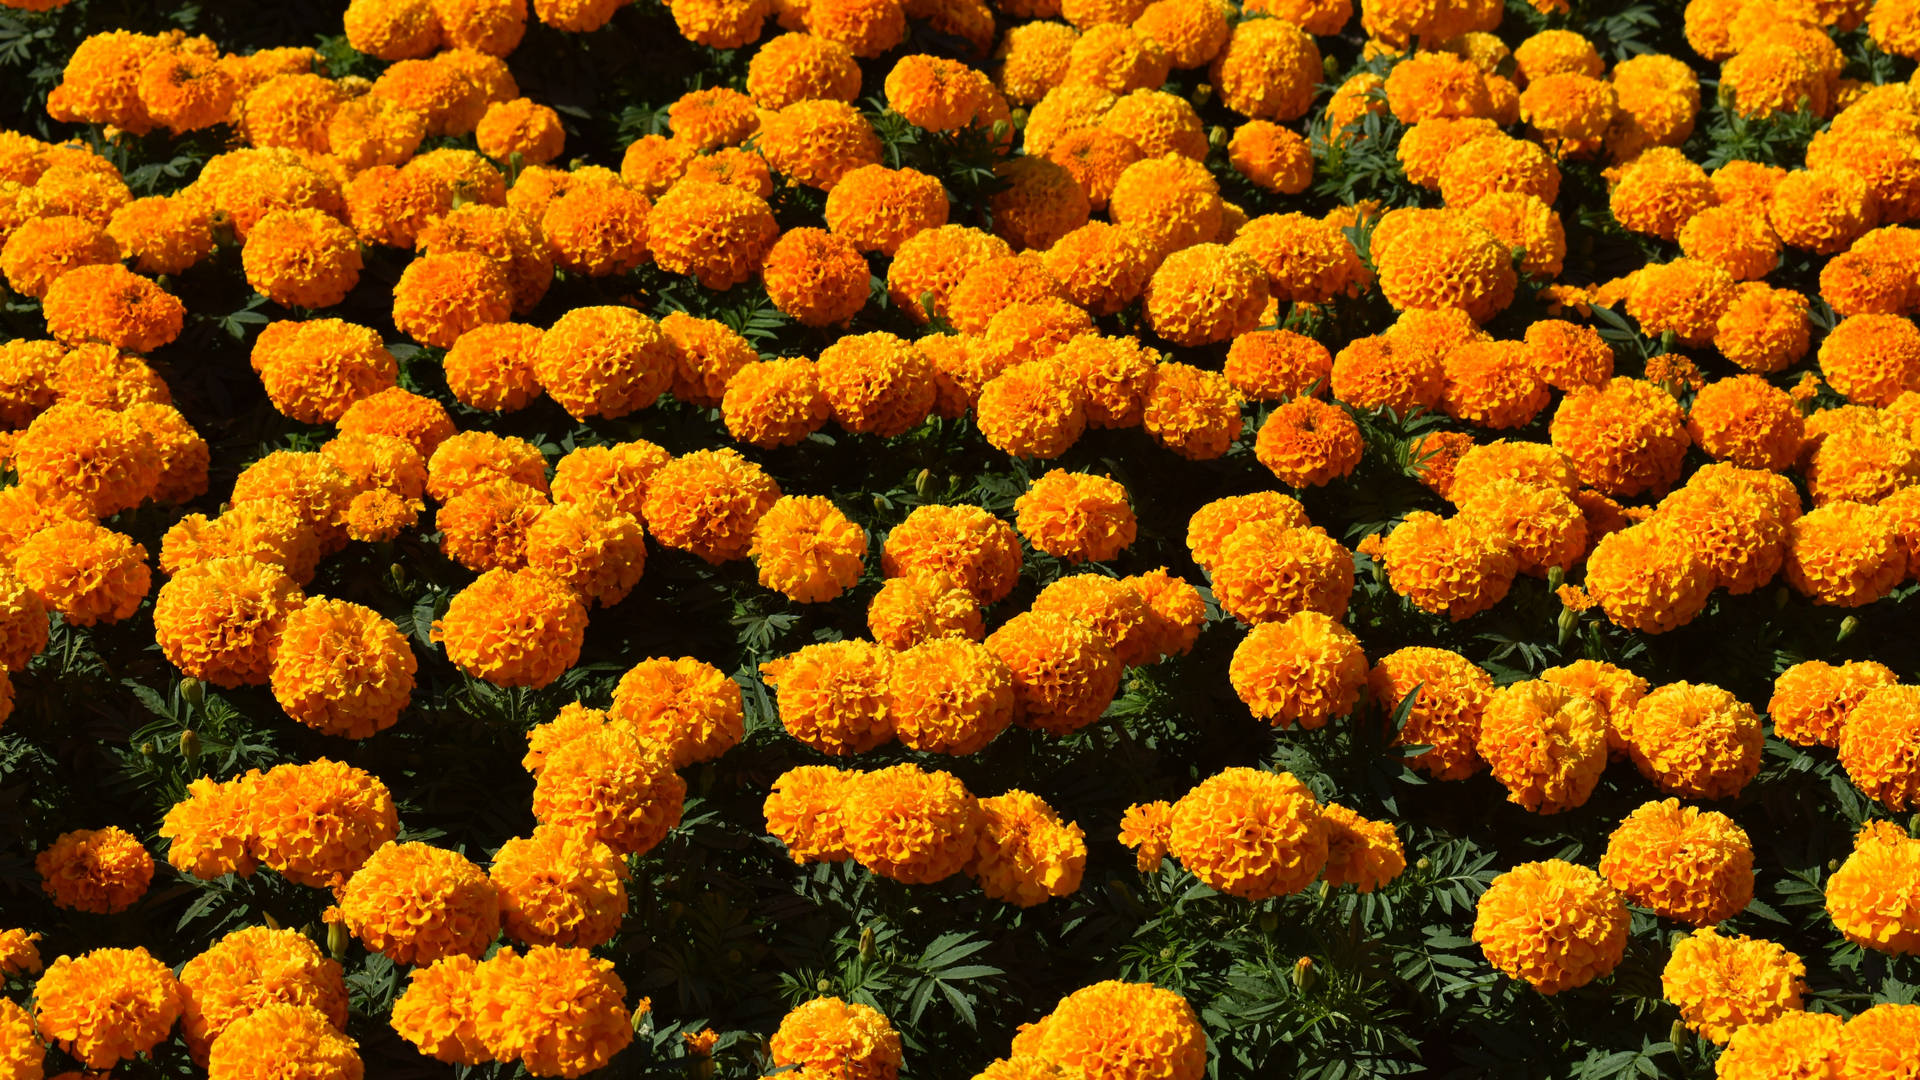 Free Marigold Wallpaper Downloads, [100+] Marigold Wallpapers for FREE |  